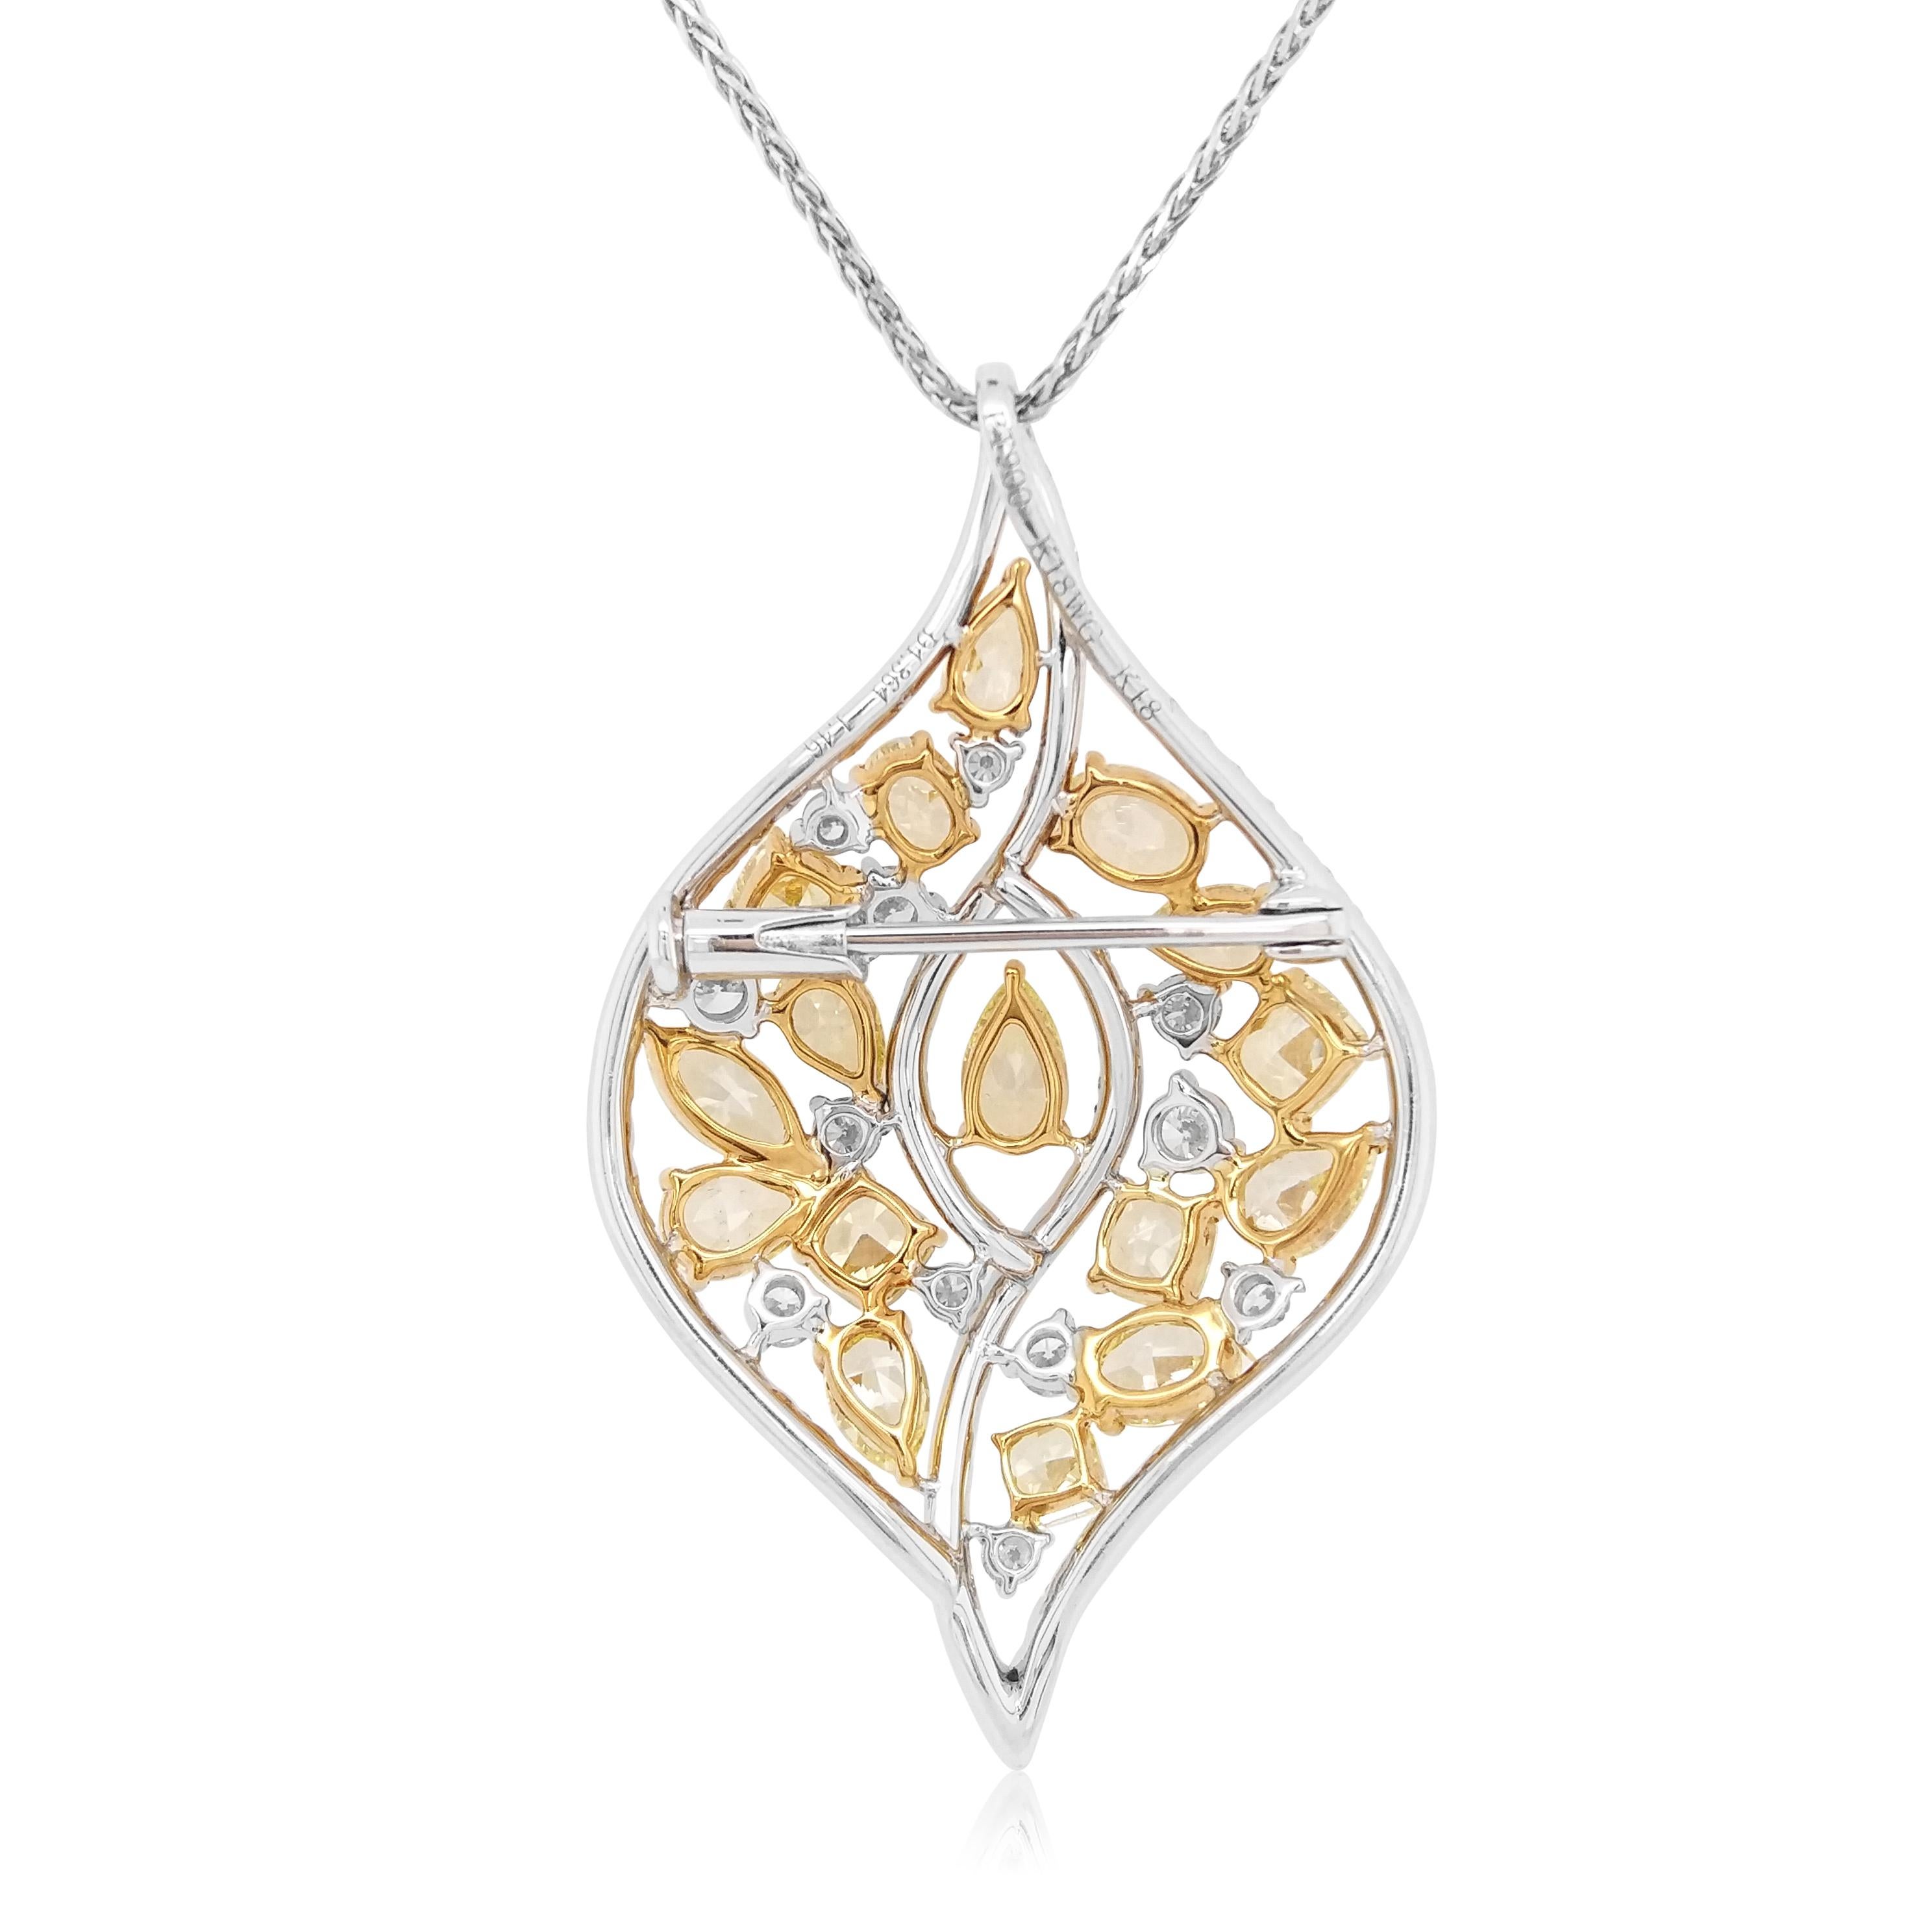 This exclusive brooch-pendant necklace 2-way features 16pcs certified luscious Yellow diamonds at the forefront of the design, framed by a delicate pattern of glittering white diamonds. Bold and striking, this unique pendant-brooch is the perfect